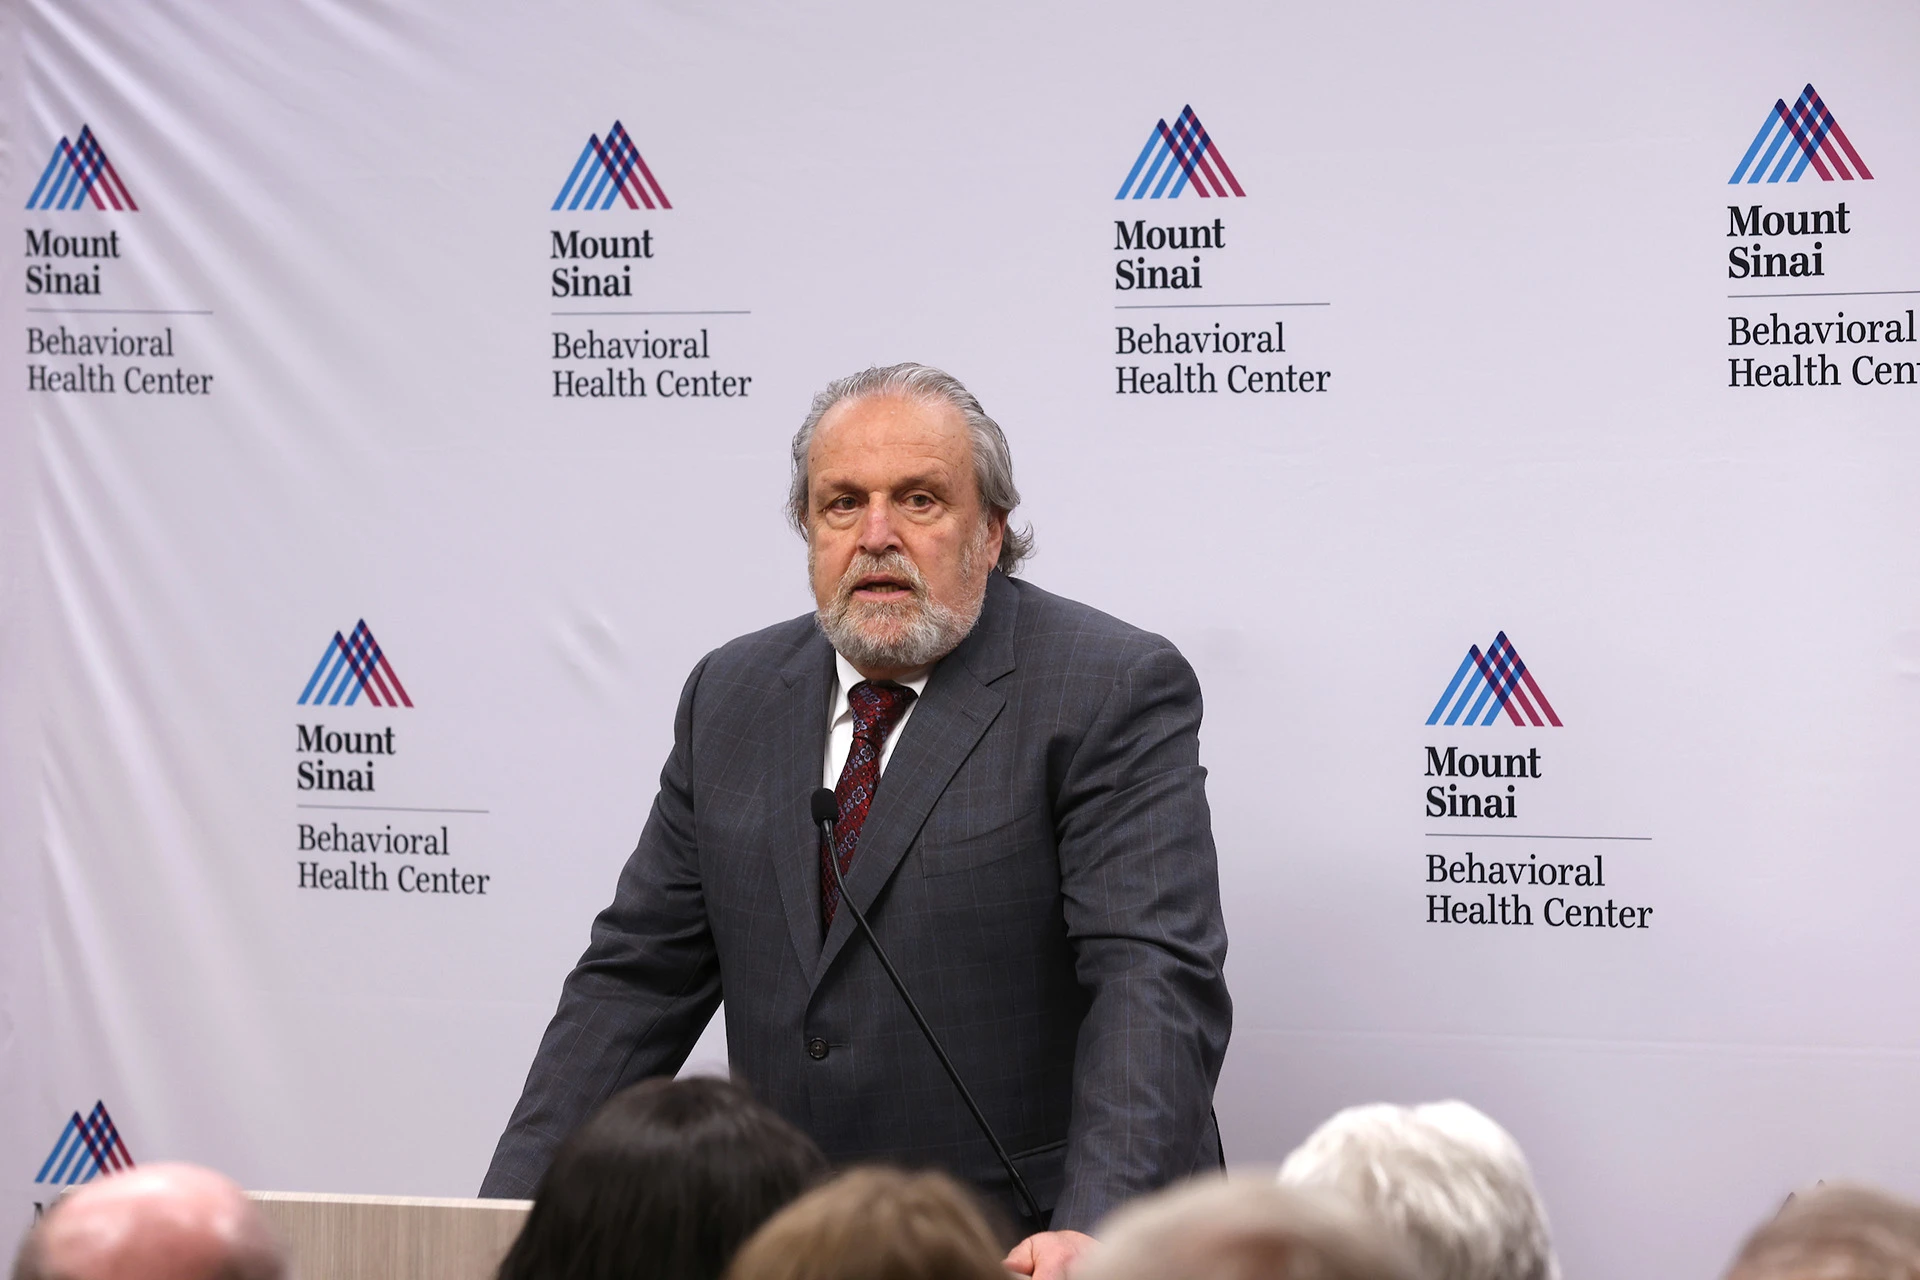 Mount Sinai is committed to investing in behavioral health resources for the community, despite challenging economic climates, says Dennis Charney, MD, Anne and Joel Ehrenkranz Dean of the Icahn School of Medicine at Mount Sinai, at the ribbon cutting ceremony of the Mount Sinai Behavioral Health Center.